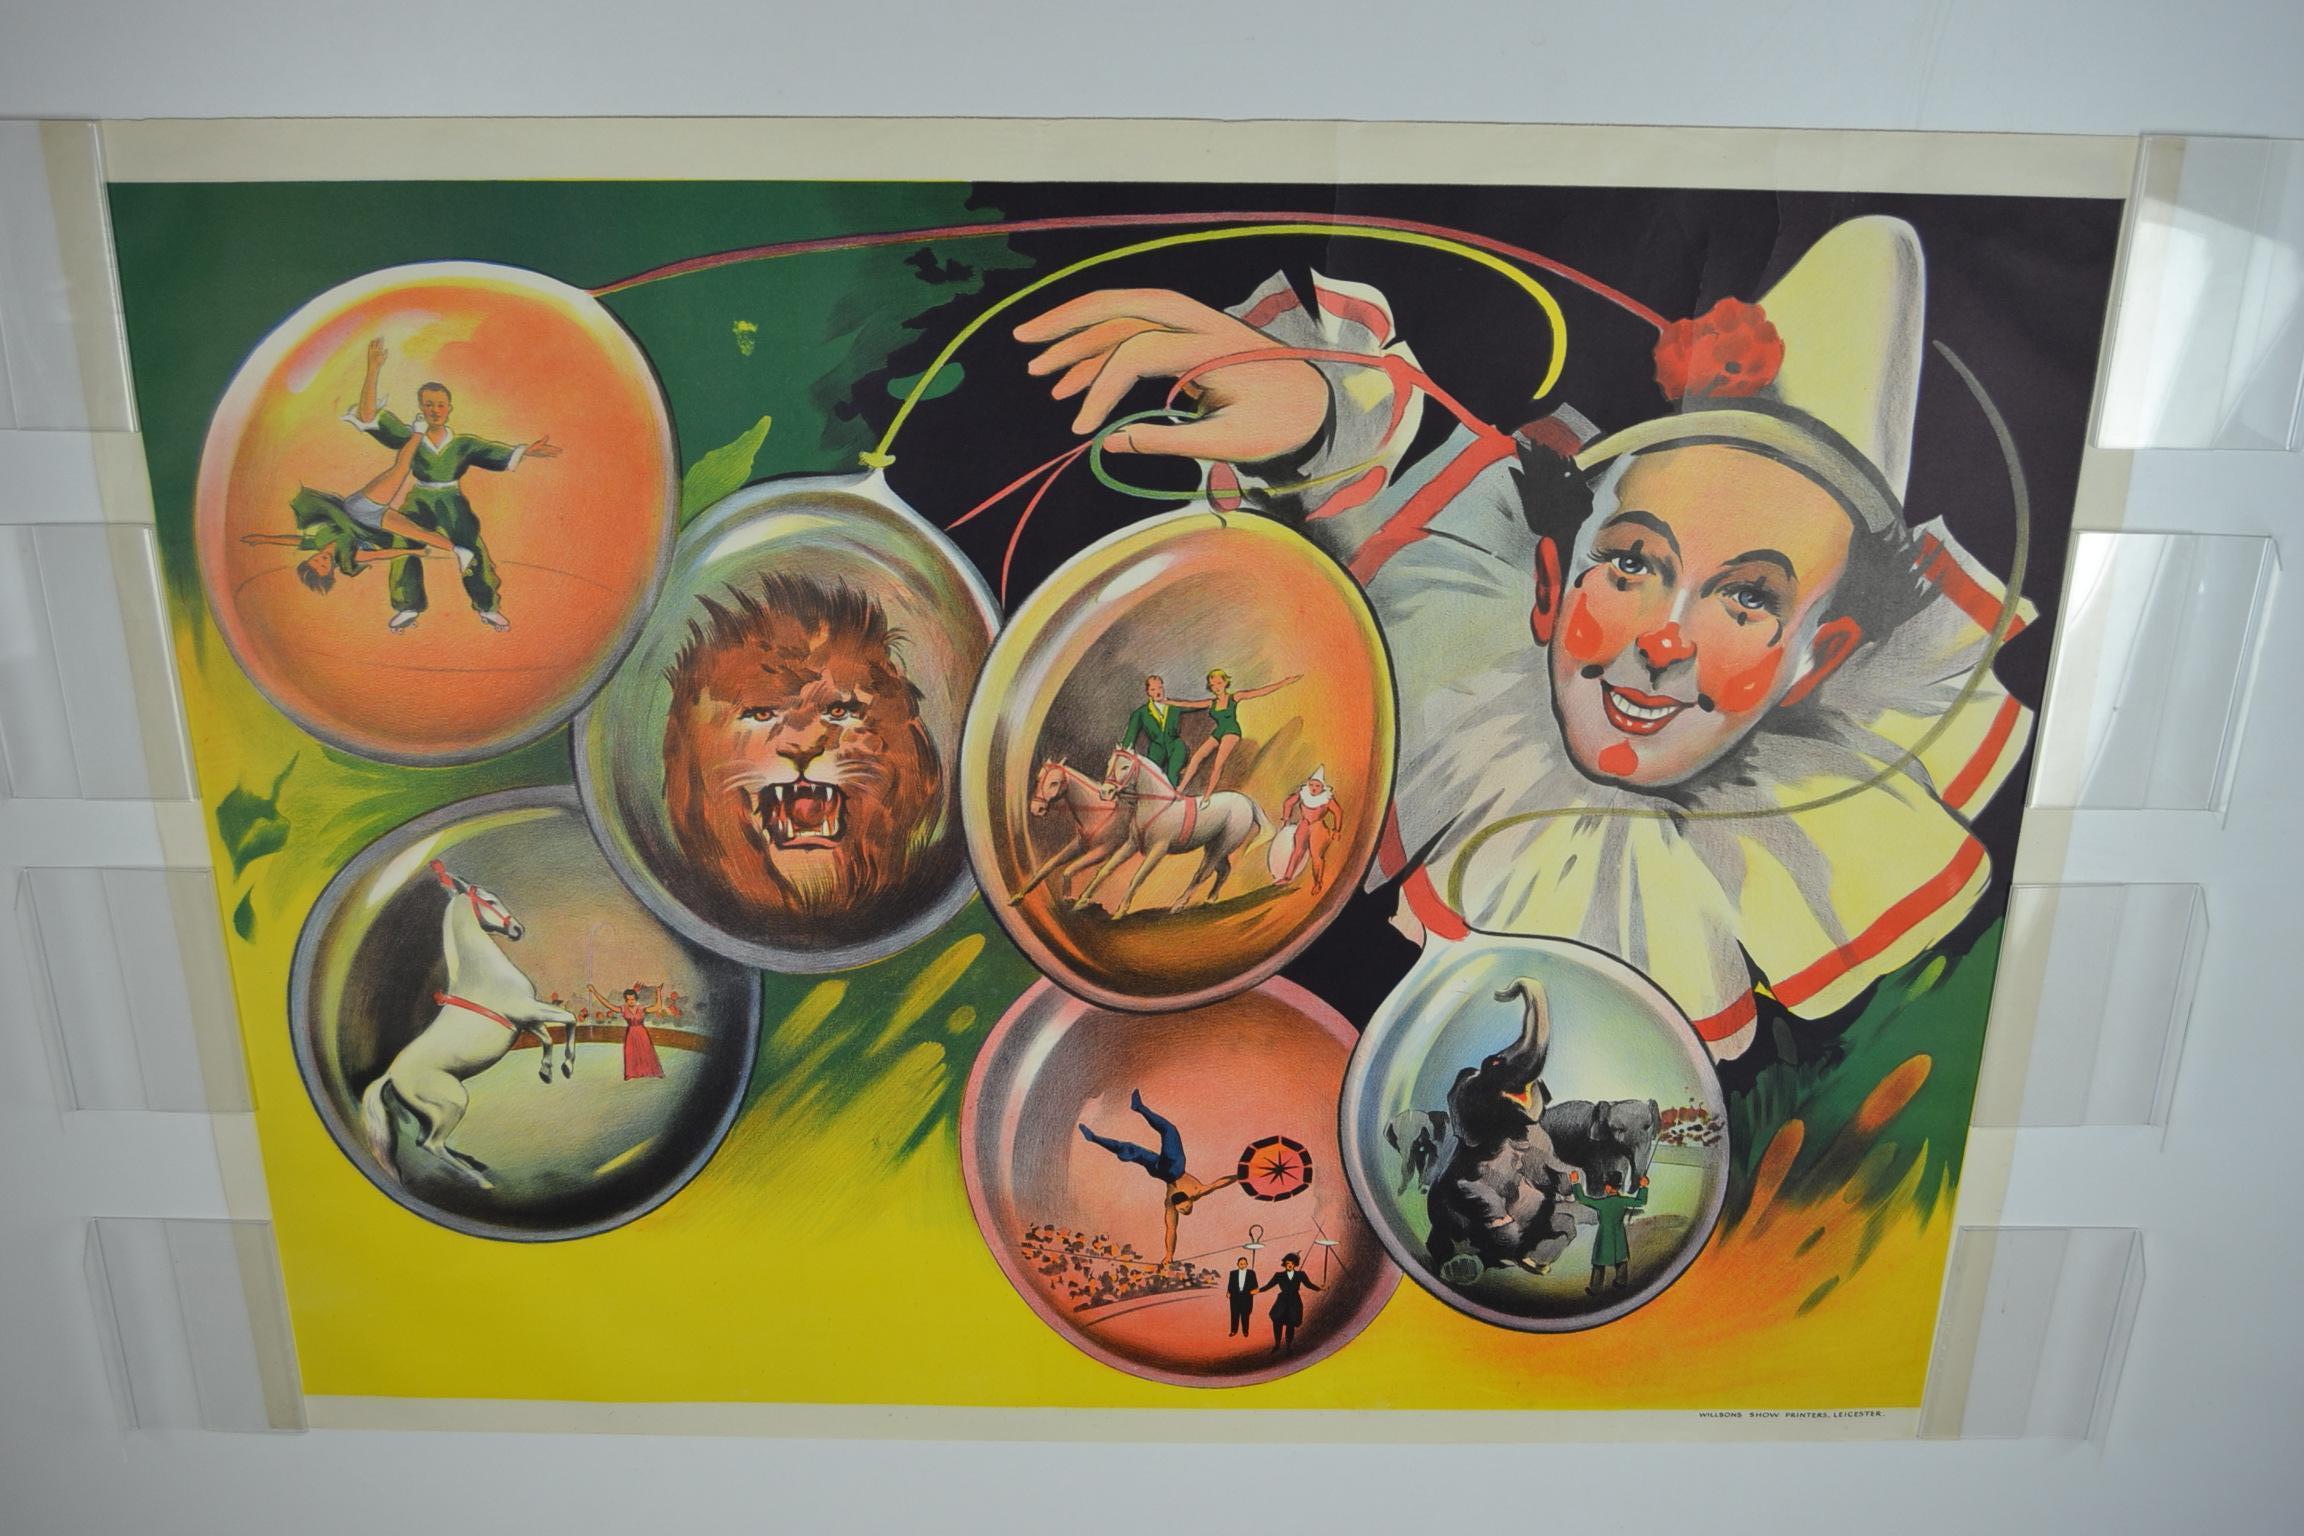 Litho Circus Poster with Clown and Circus Scenes Printed by Willsons Leicester 10